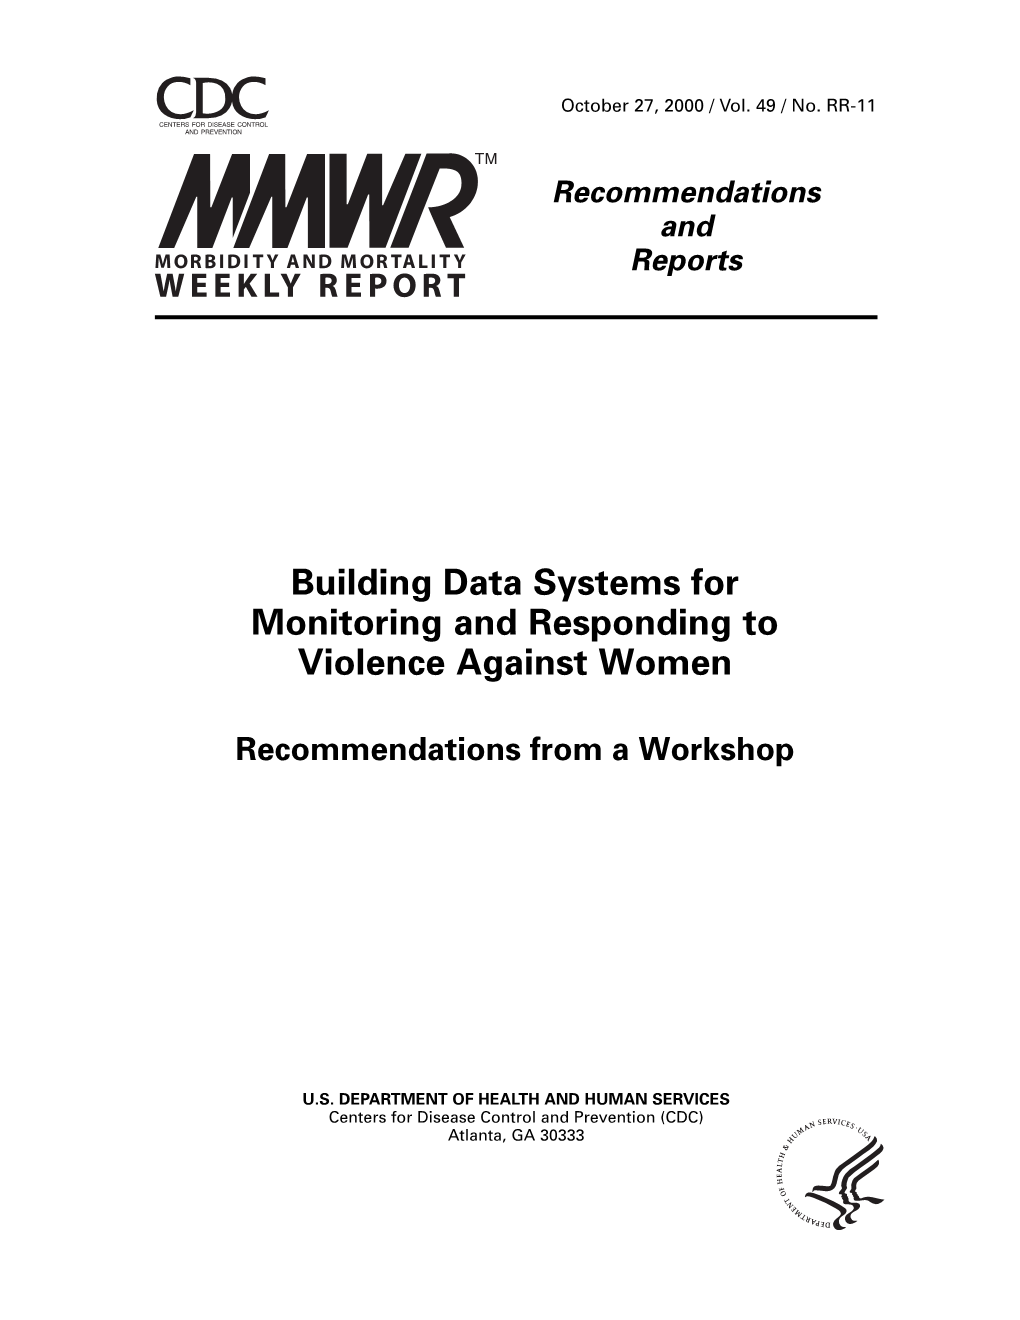 Building Data Systems for Monitoring and Responding to Violence Against Women